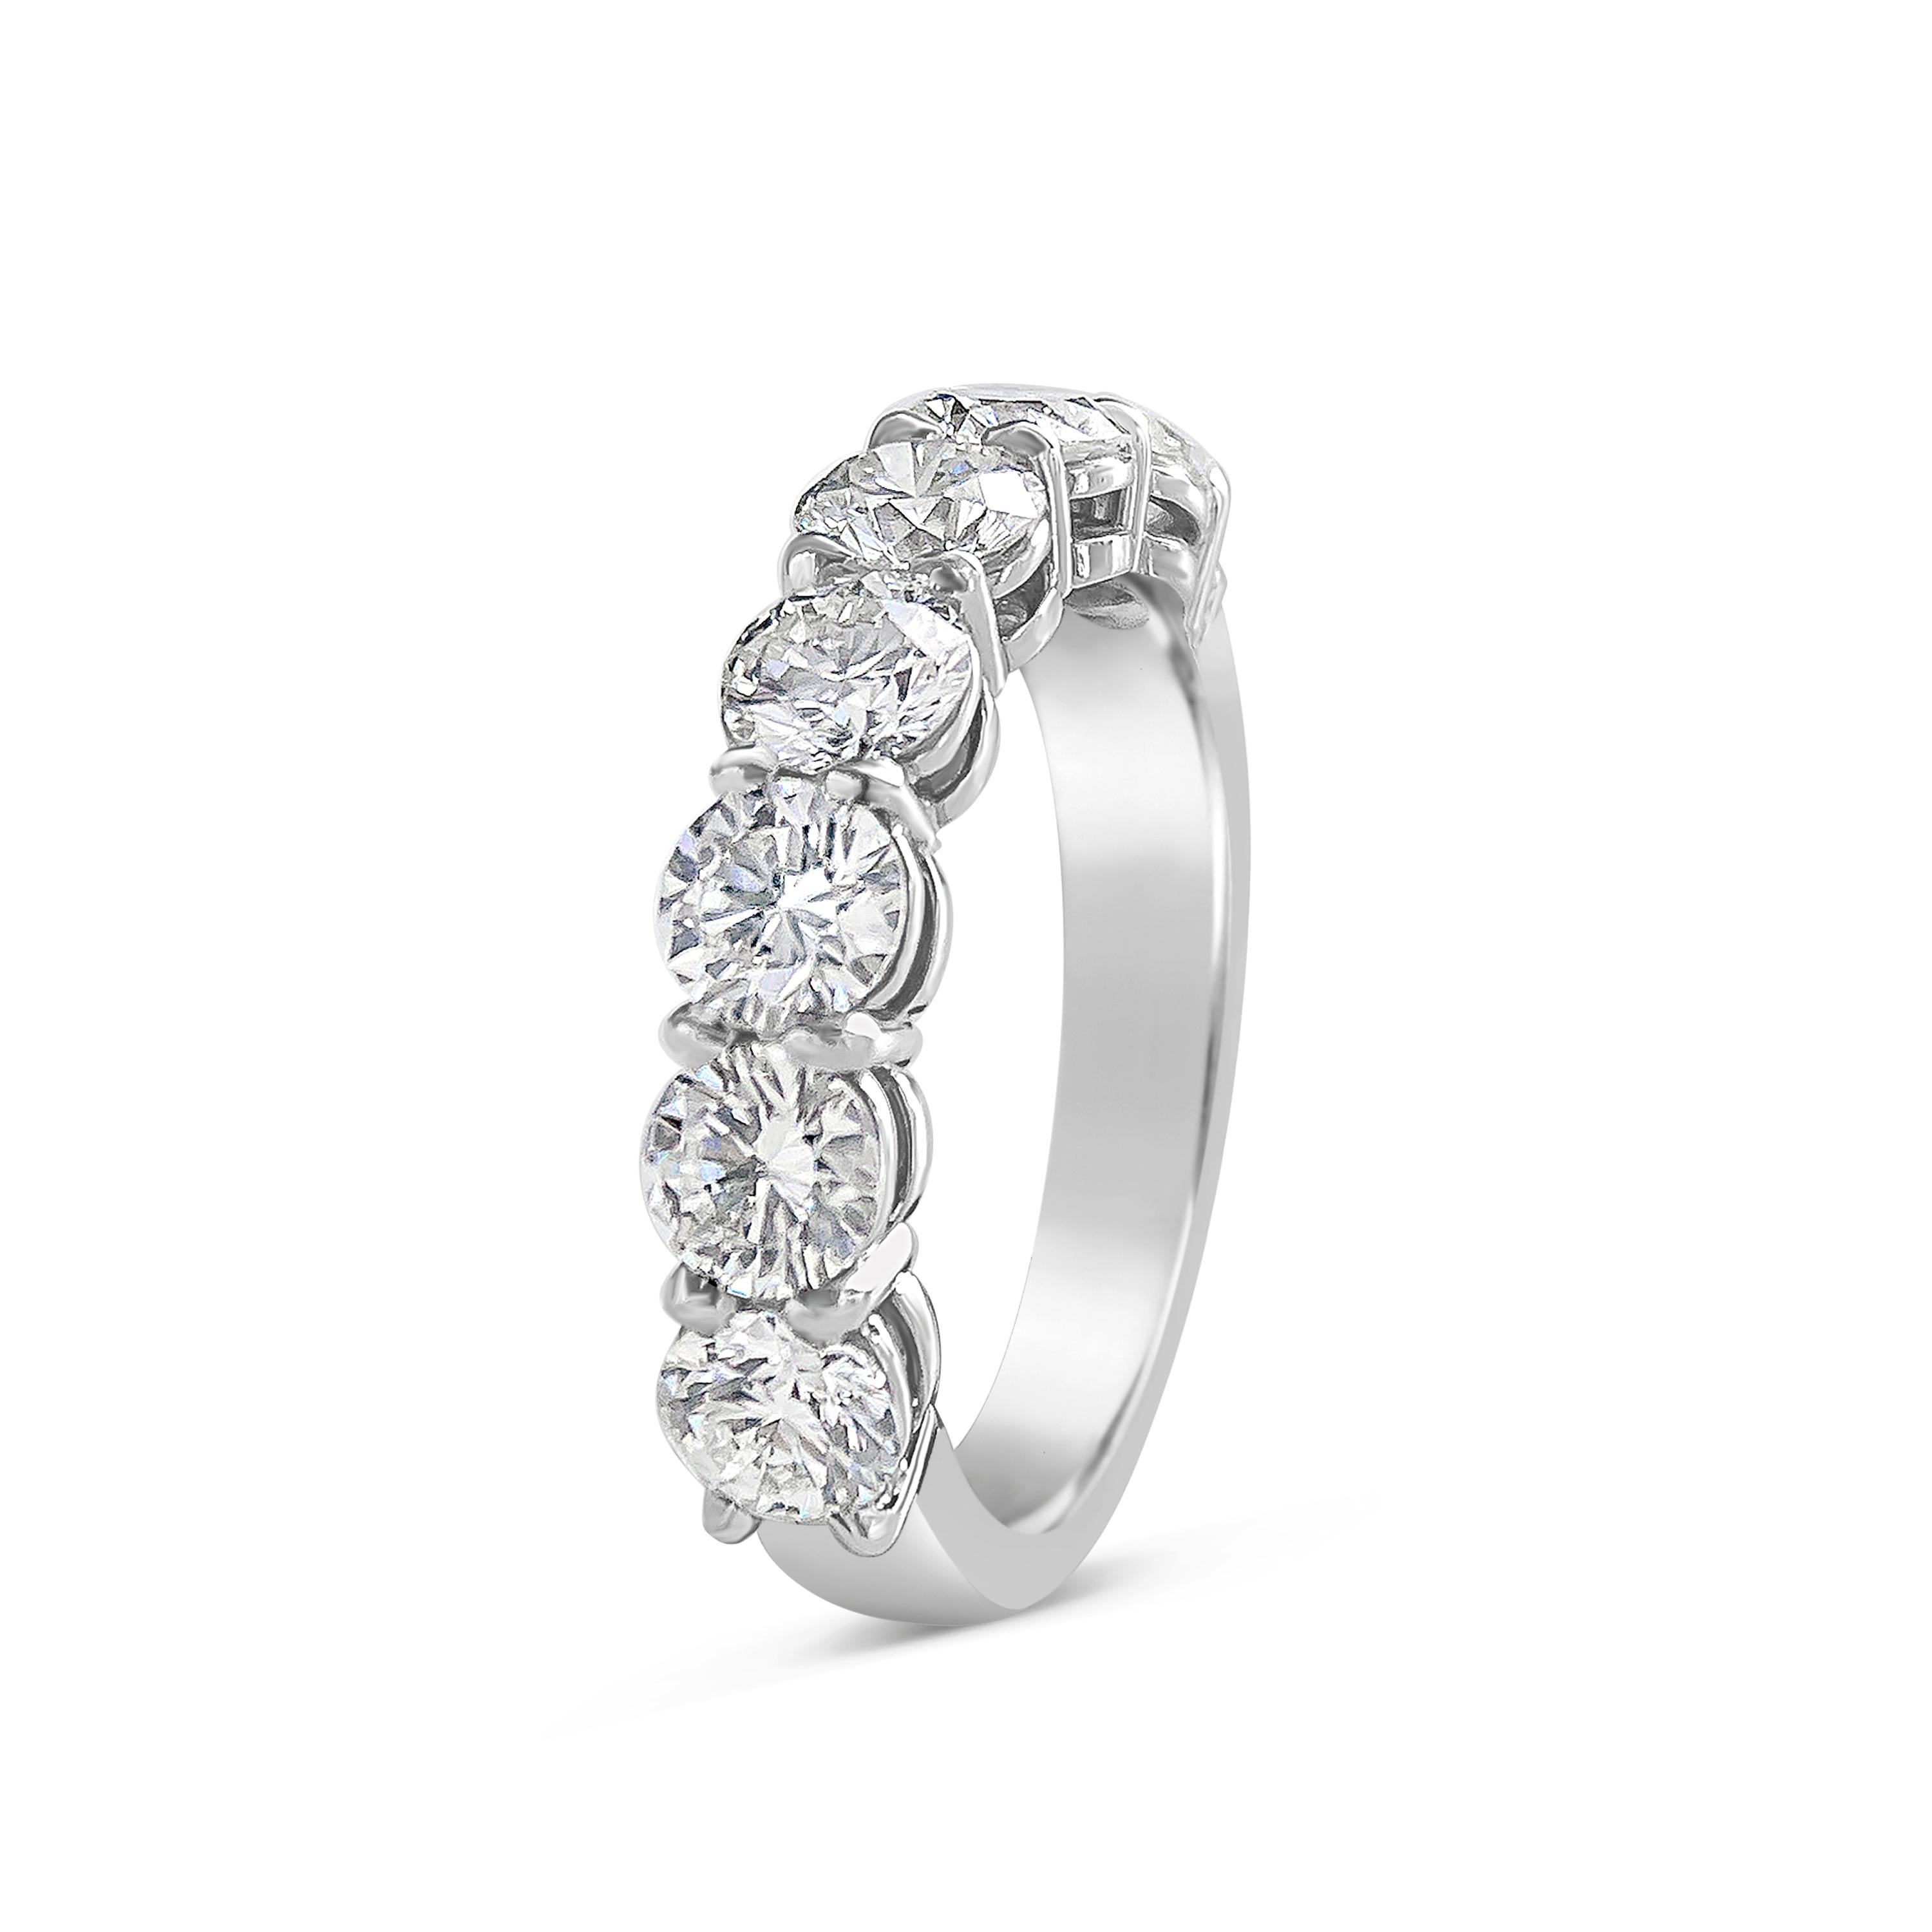 A classic half-way wedding band showcasing seven round brilliant diamonds set in a shared prong setting made in platinum. Diamonds weigh 2.28 carats total.

